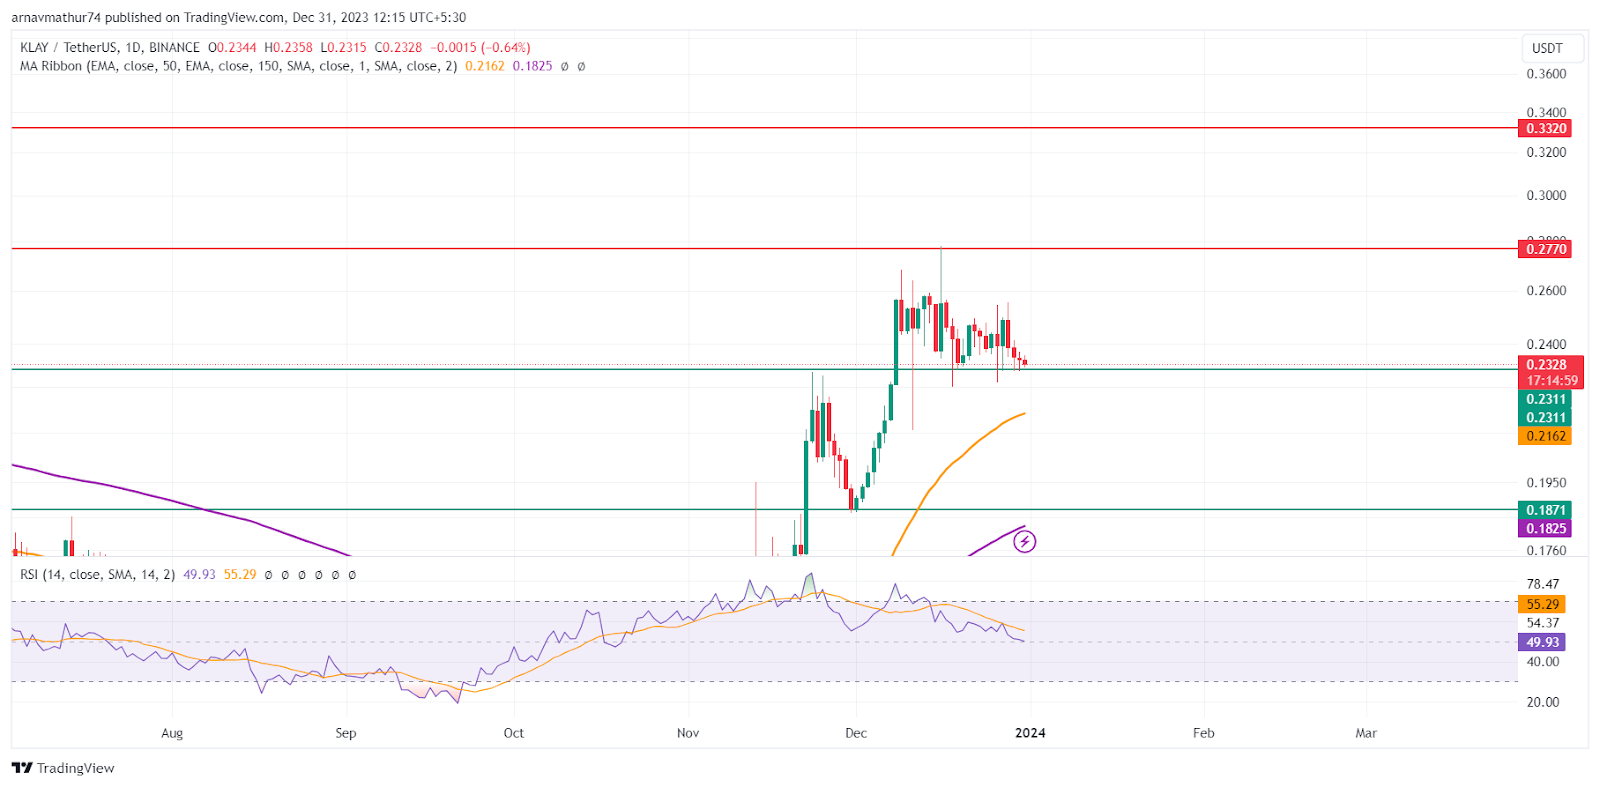 KLAY Crypto: The Bulls Are Resting on a Major Support Level